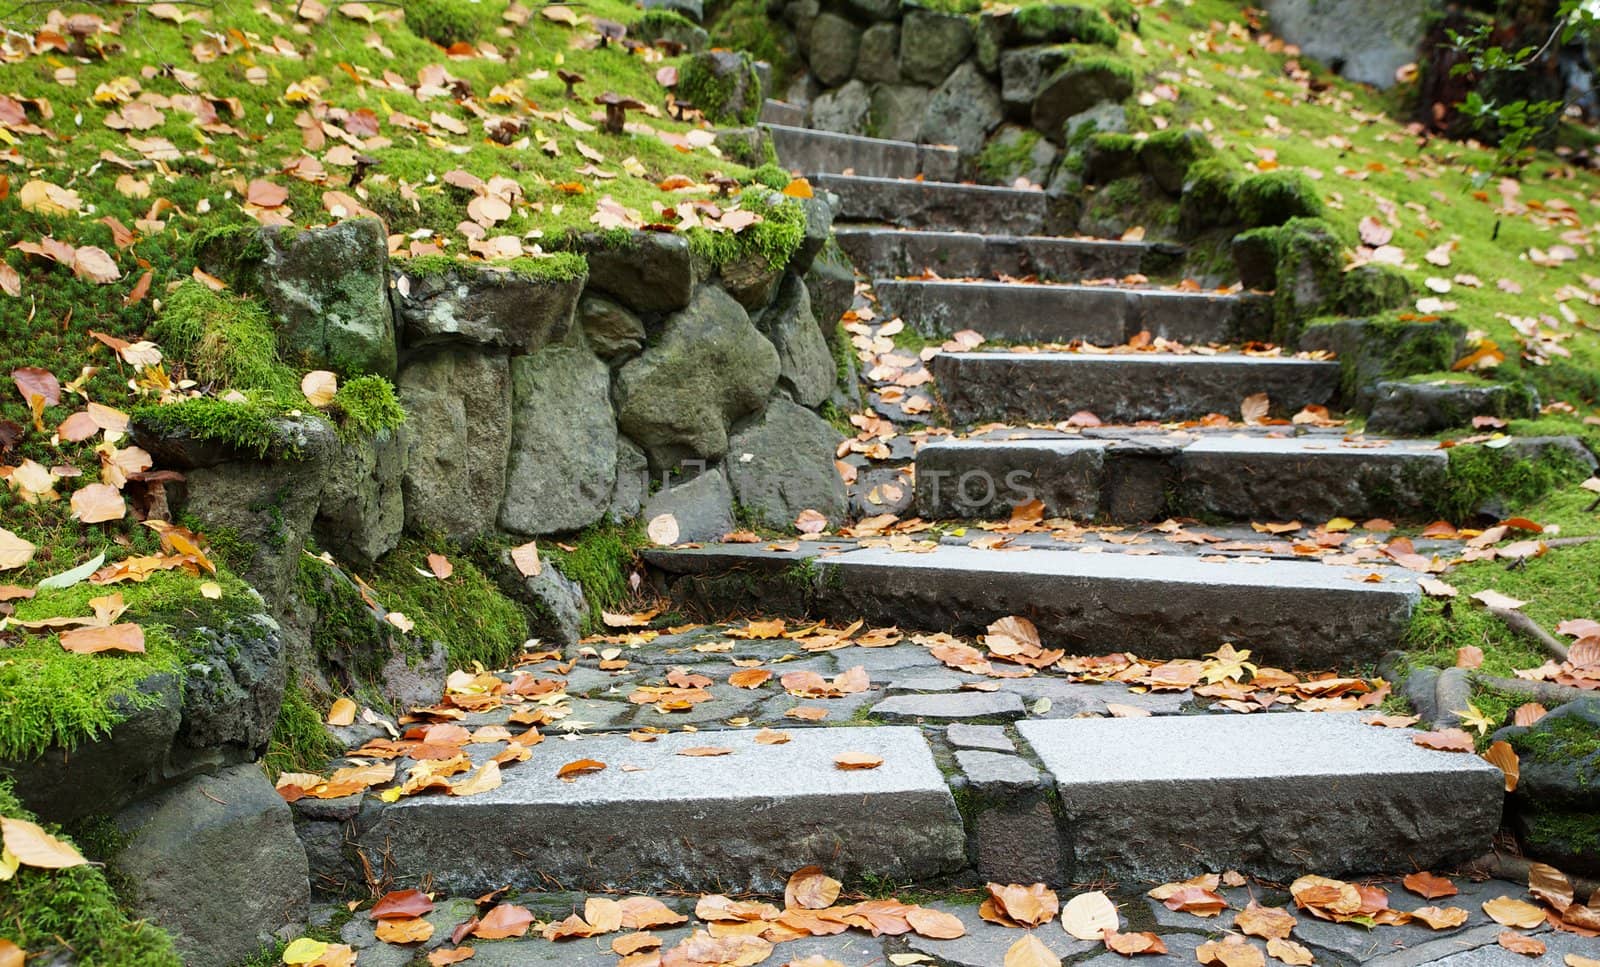 outdoor downward leading steps outdoor in a park with a shallow DOF